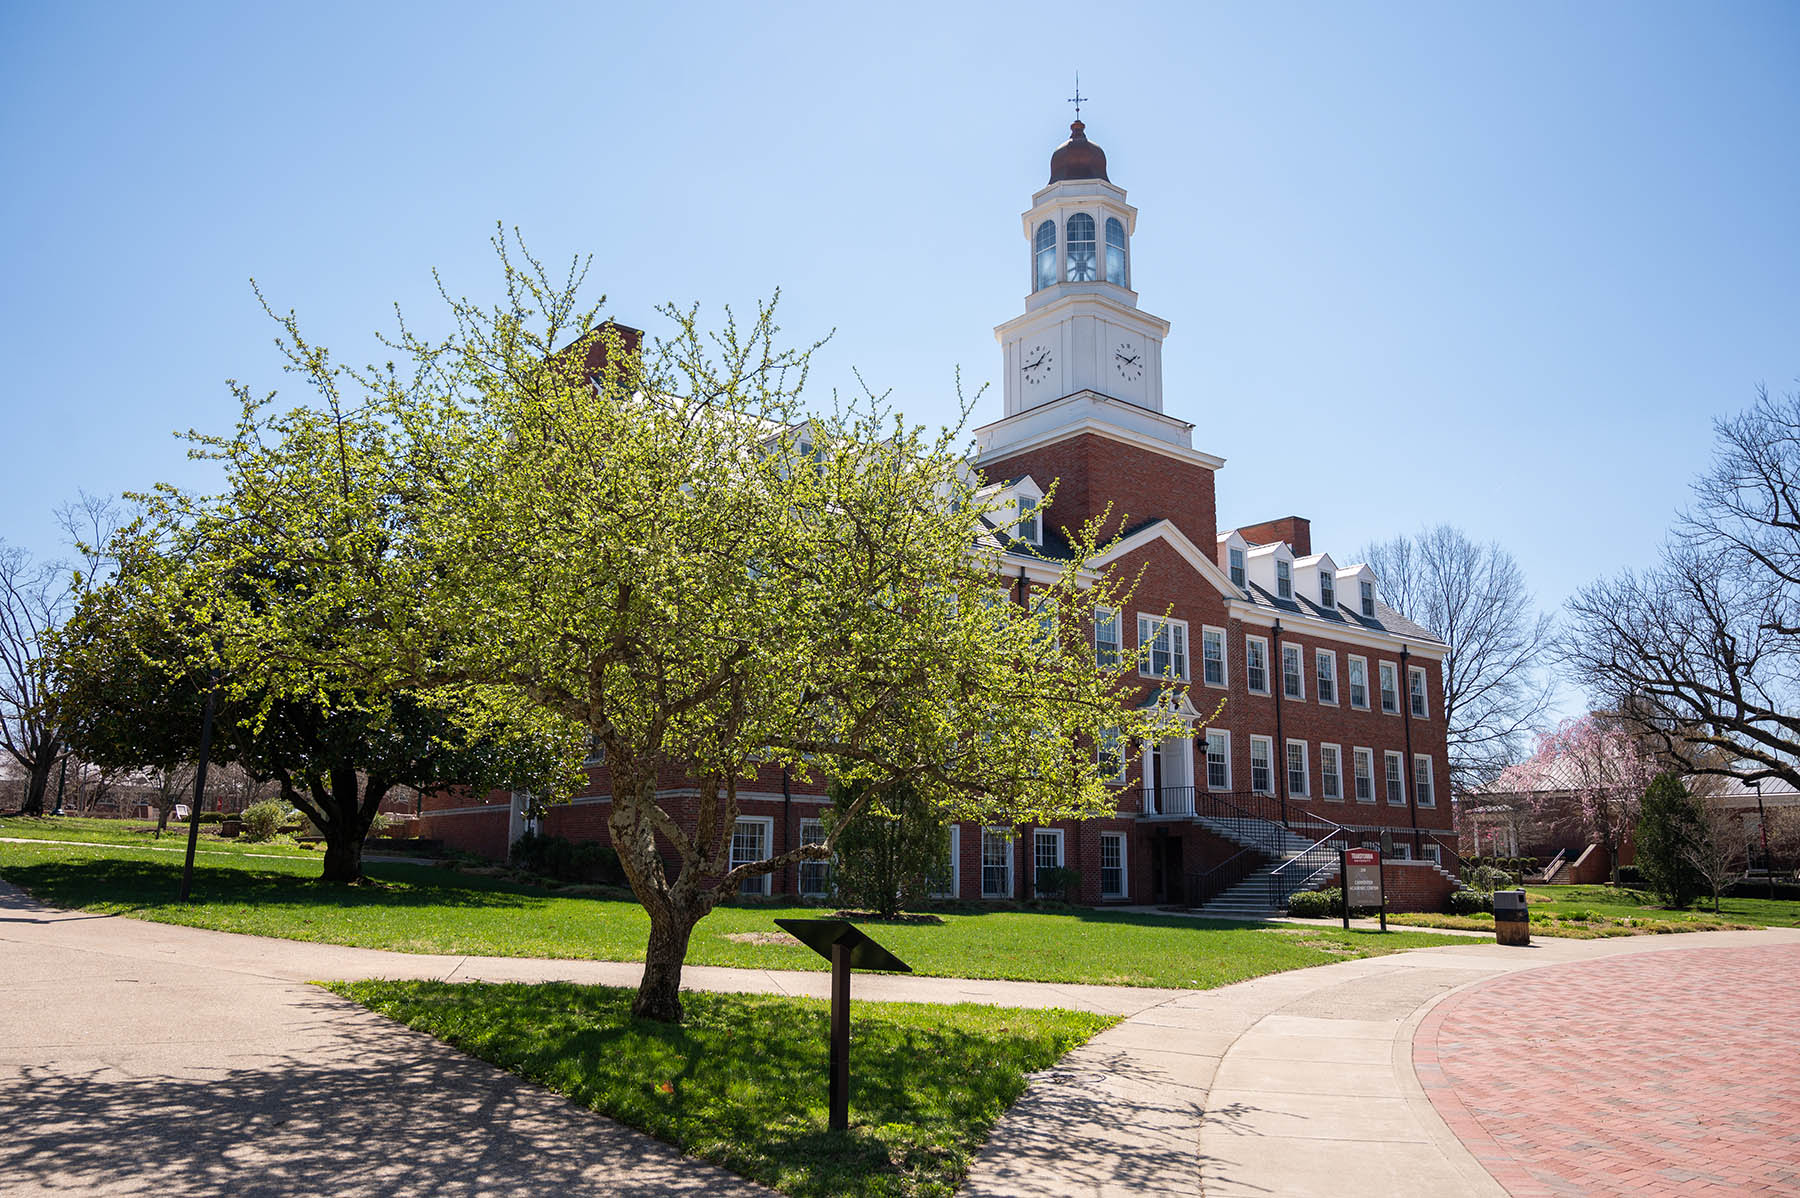 Transylvania updates Heathy at Transy guidelines for group sizes, events